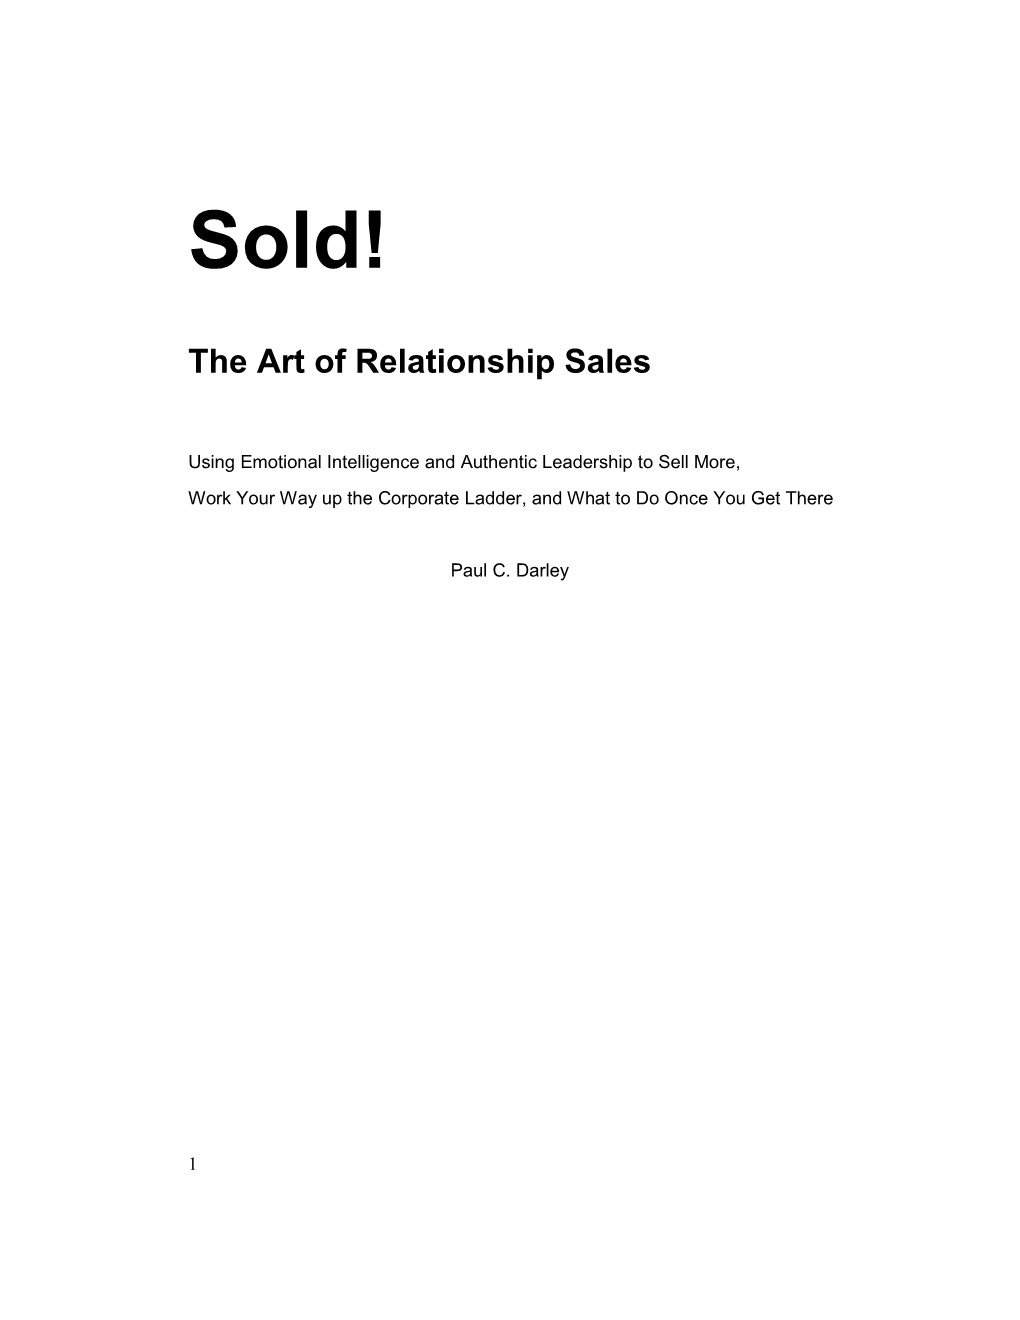 The Art of Relationship Sales